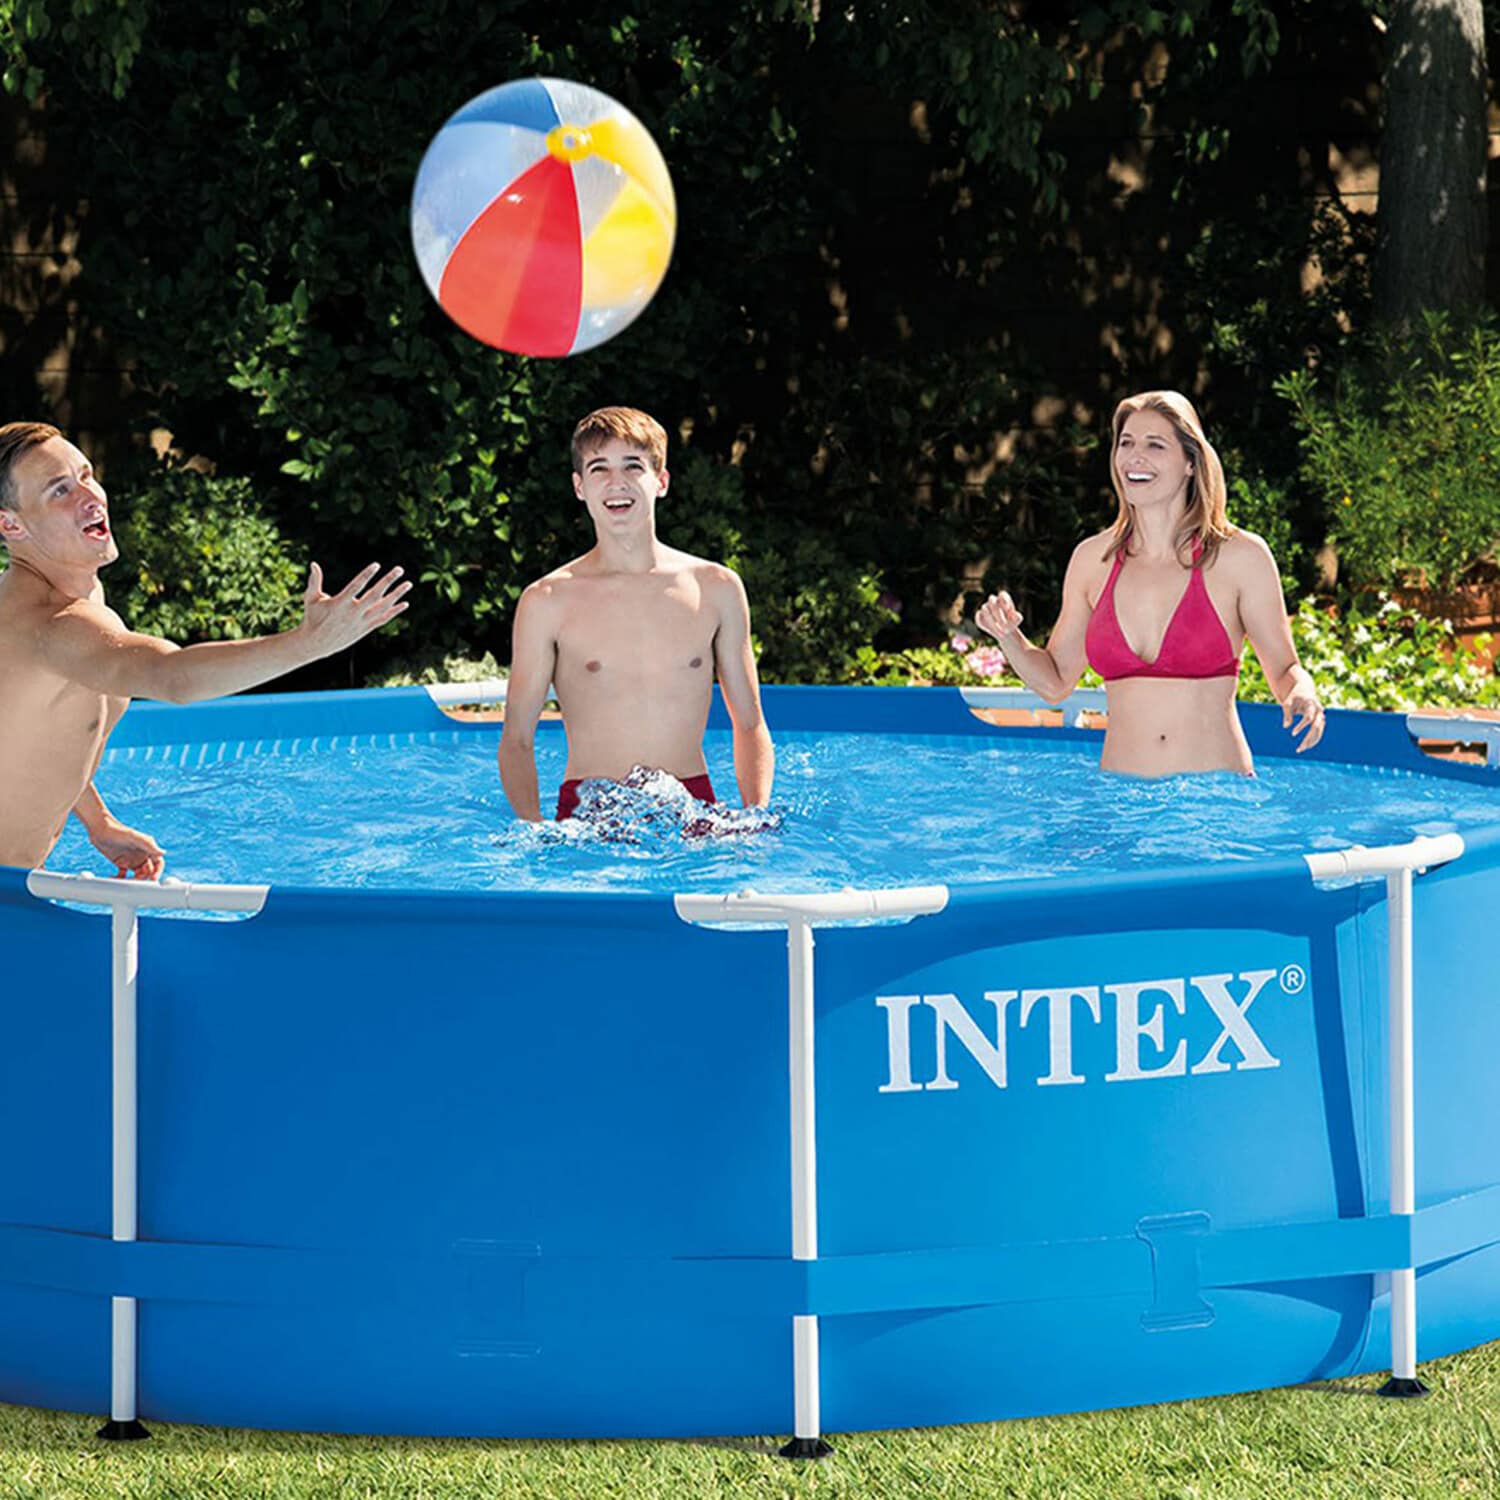 Intex 10' X 30 Easy Set Round Inflatable Above Ground Pool With